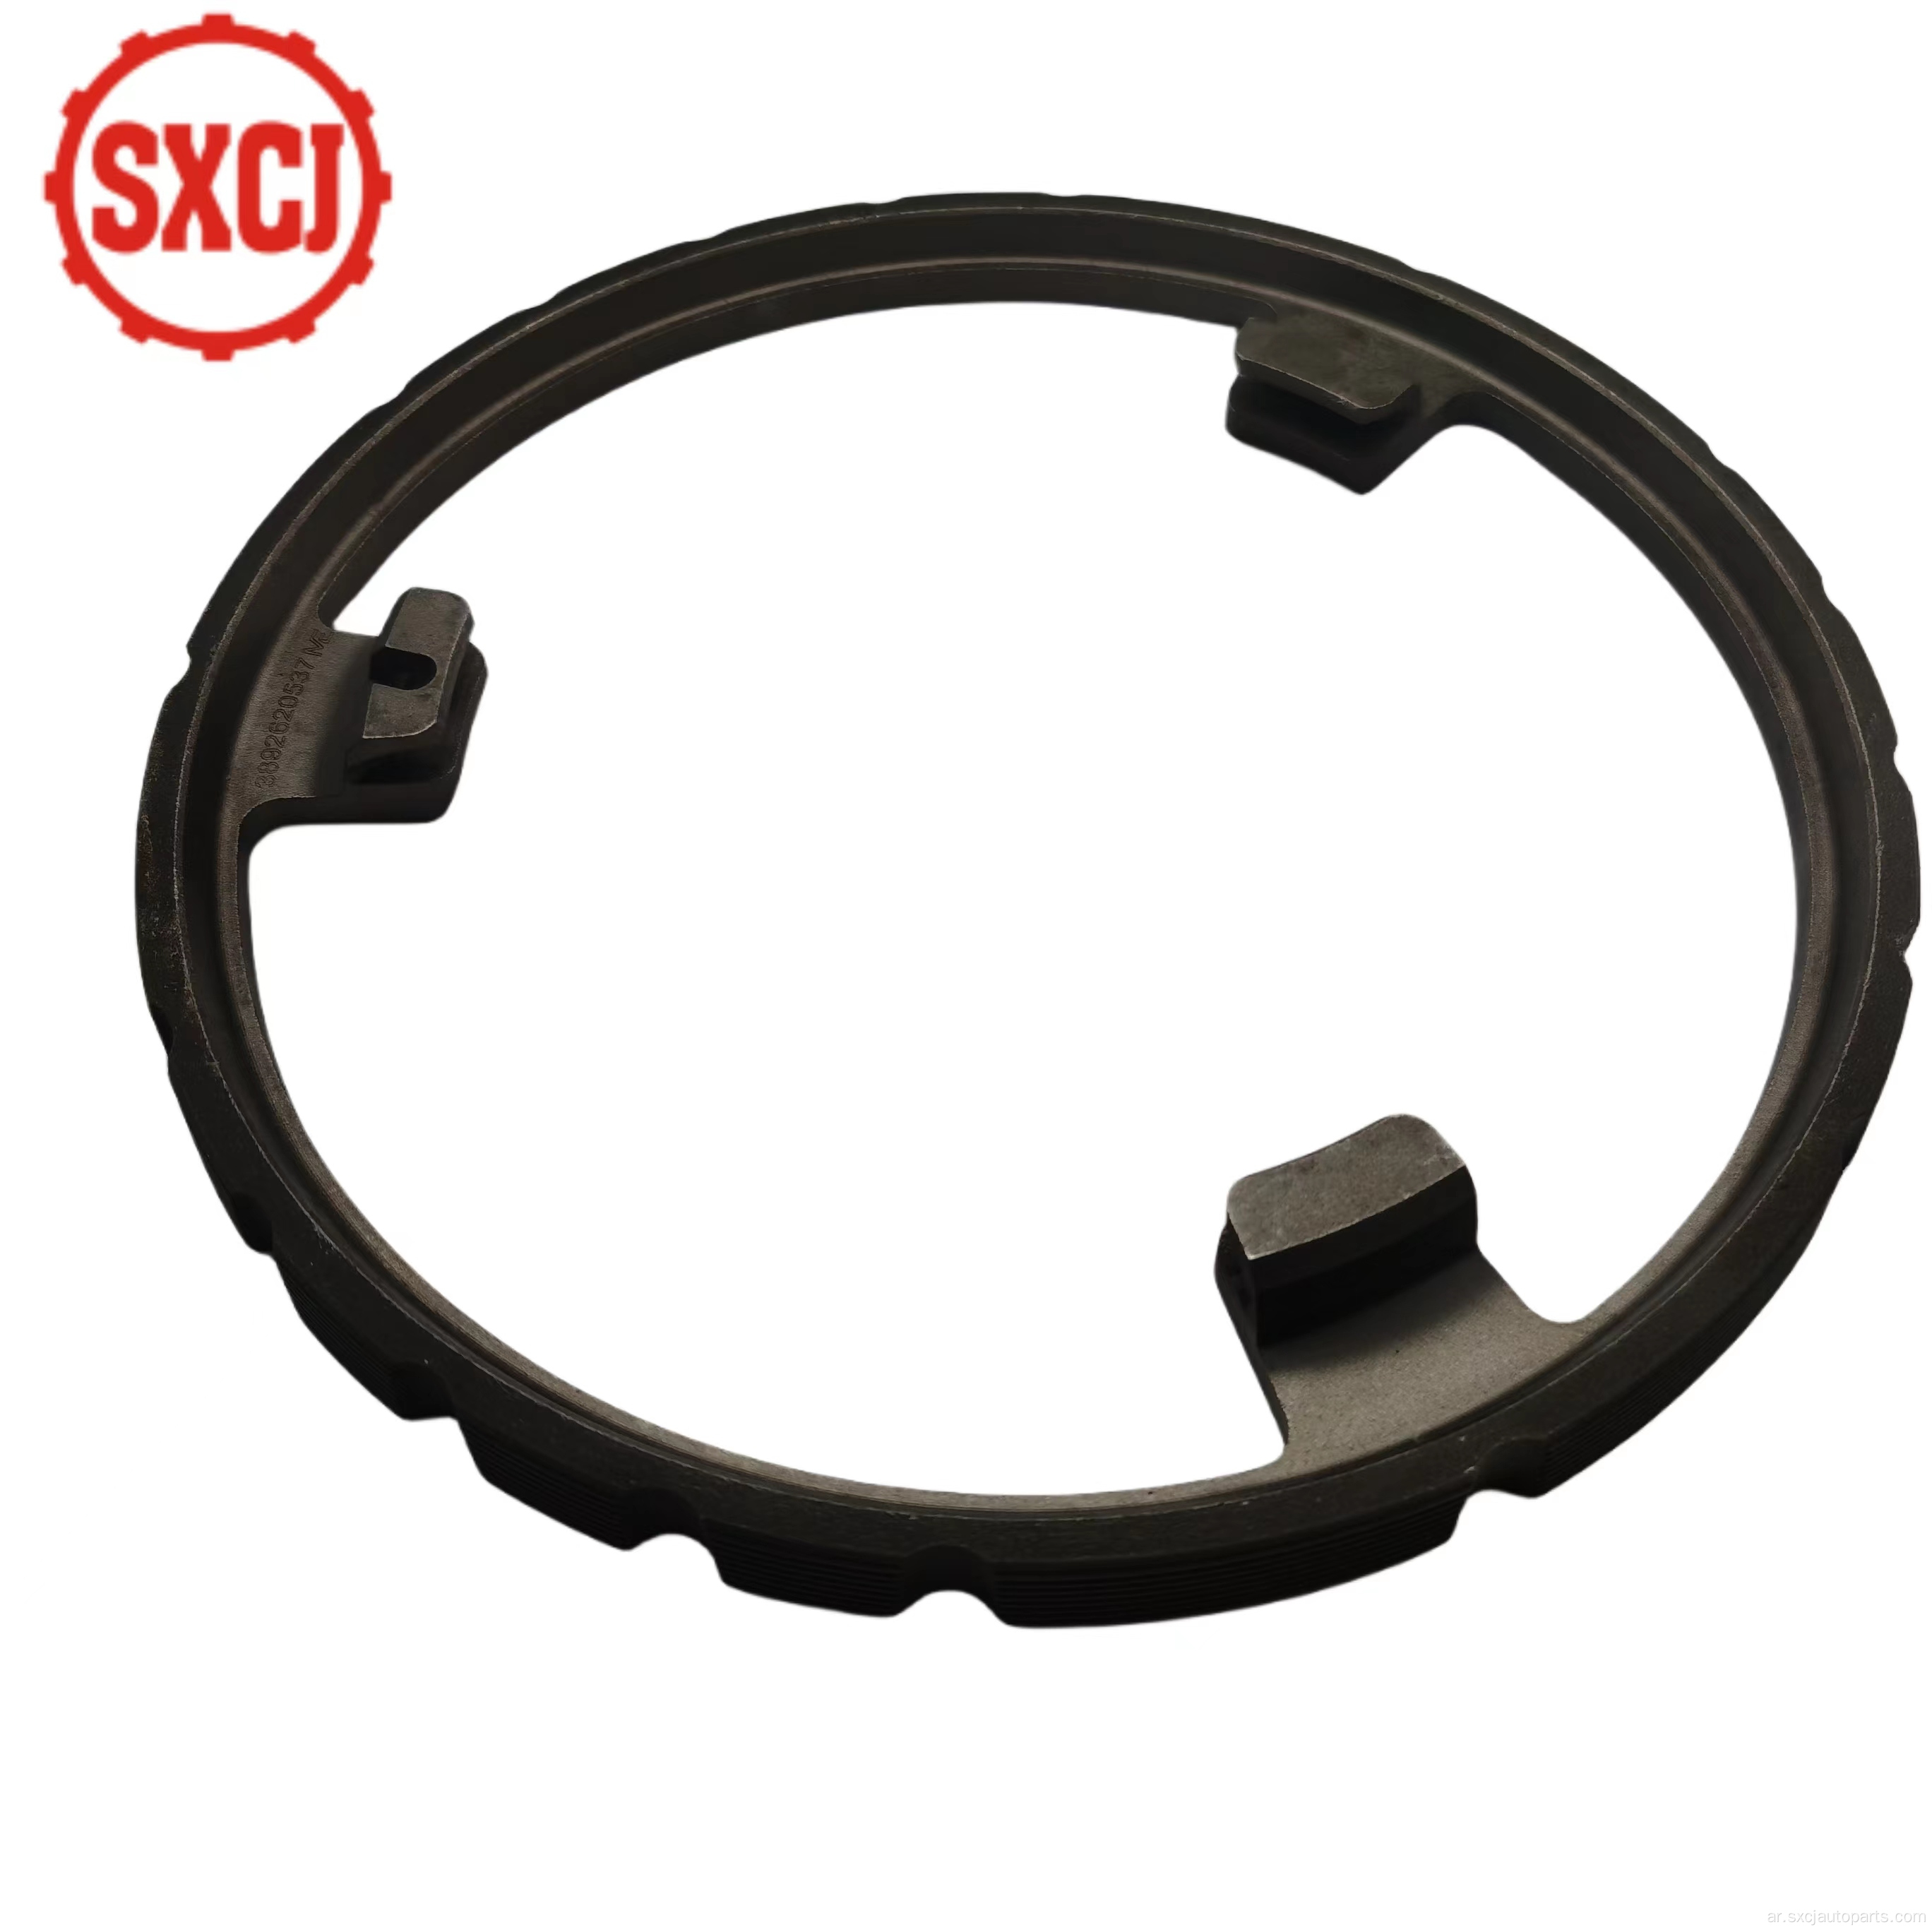 OEM389 262 0537/389 262 0037/389 262 0137/389 262 3337 Manual Auto Parts Transmission Ring for Benz